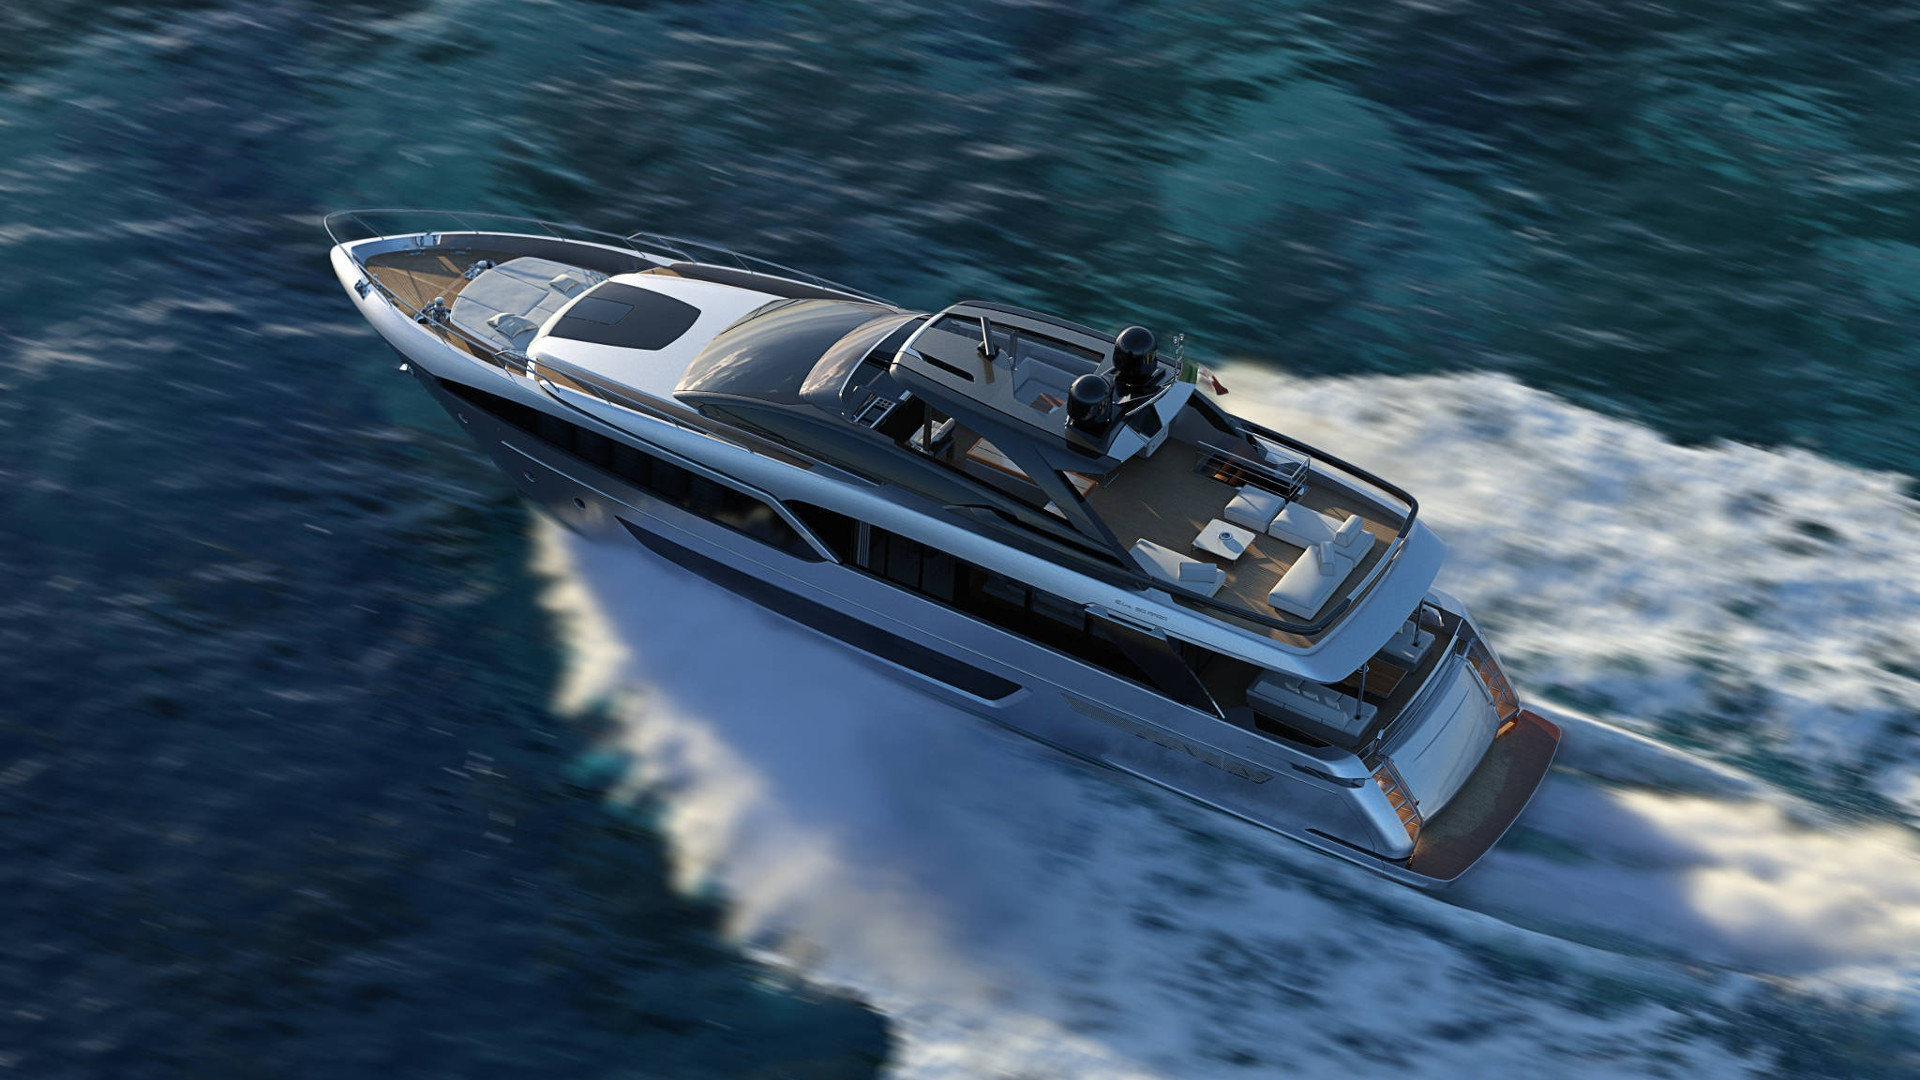 360 VR Virtual Tours of the Riva 90 Argo